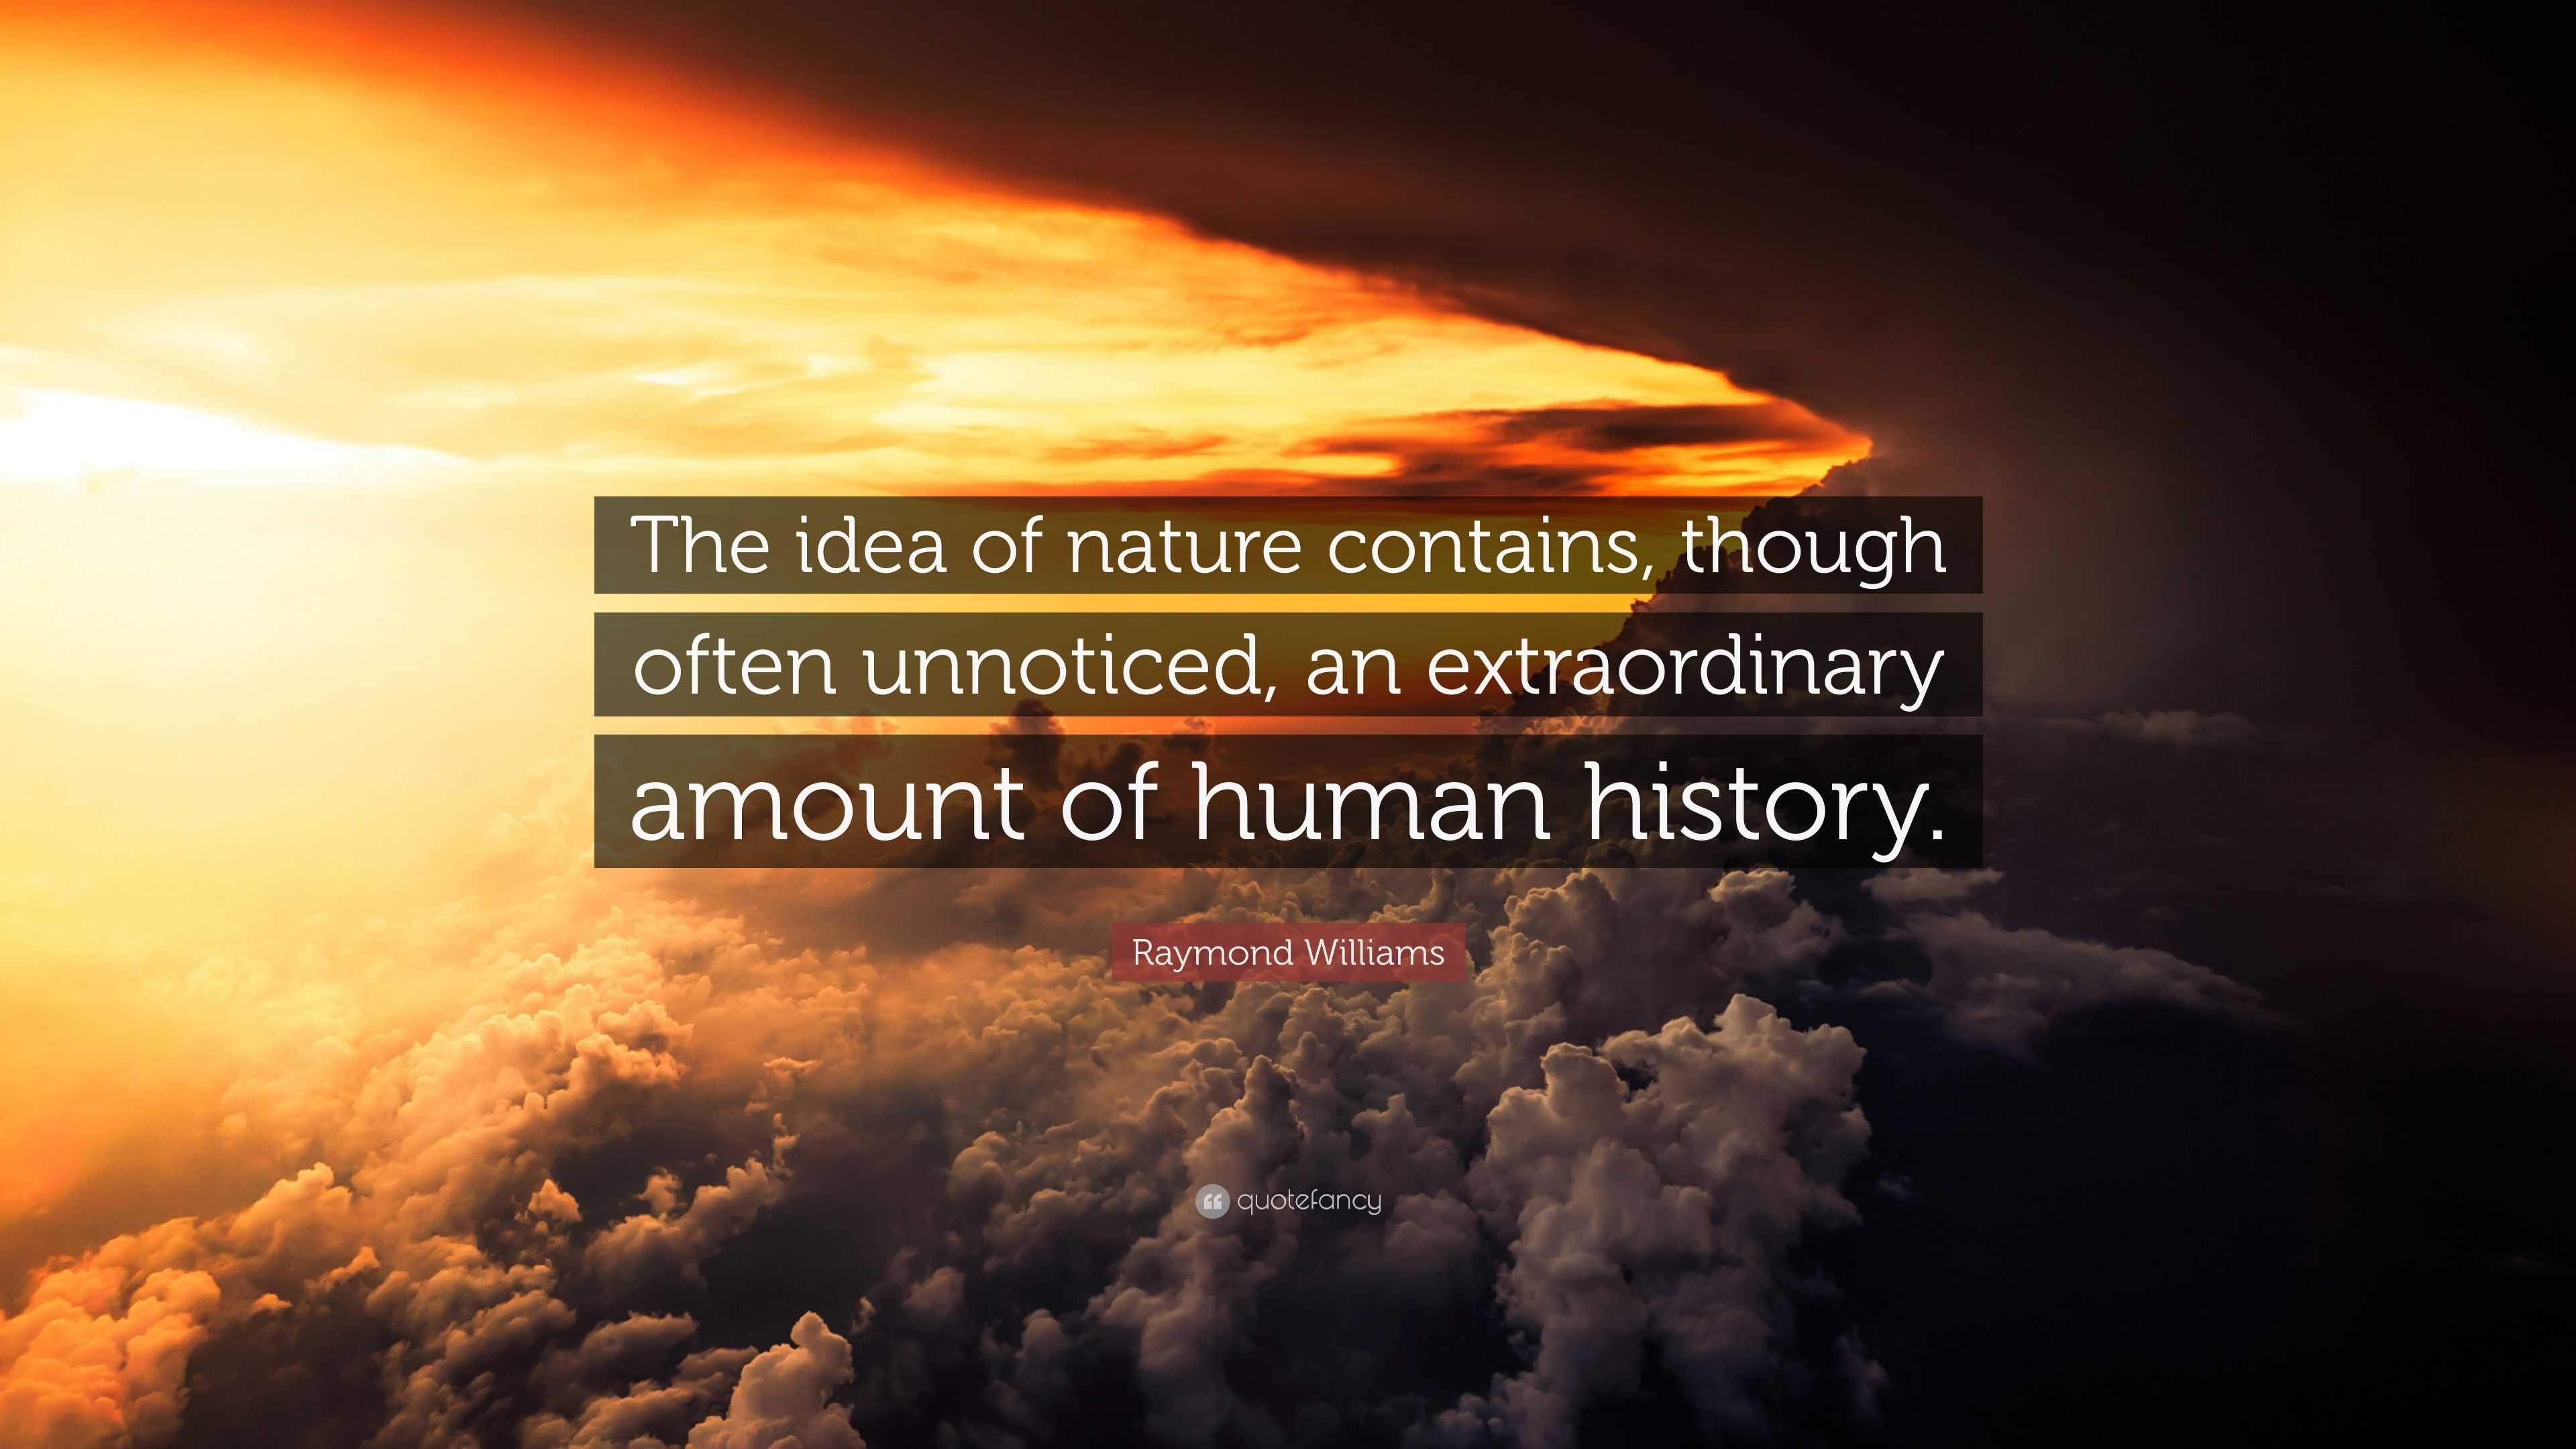 Raymond Williams Quote: “The idea of nature contains, though often unnoticed, extraordinary amount of human